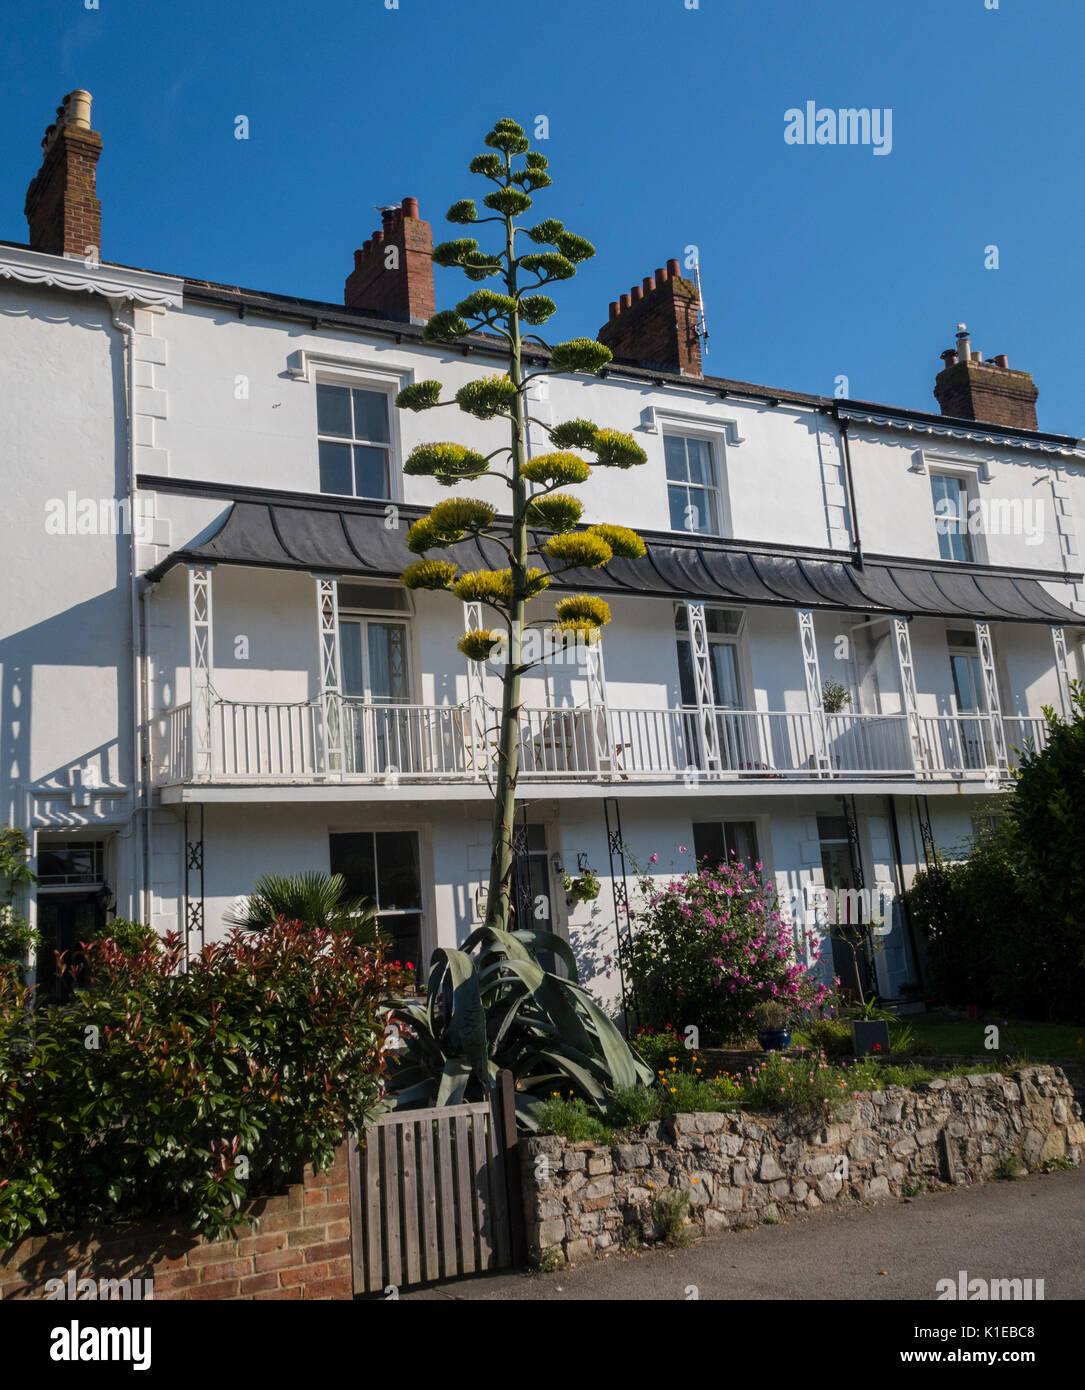 A rare Mexican cactus 'Agave Americana' has grown to 30 feet within 10 weeks in a Devon street. Having lain dormant for years, the plant erupted in June, and now sits at rooftop height of the 3 storey house in Sidmouth. Known as the century plant due to it's more usual dormancy, flowering specimens are exceedingly rare in the UK. Stock Photo